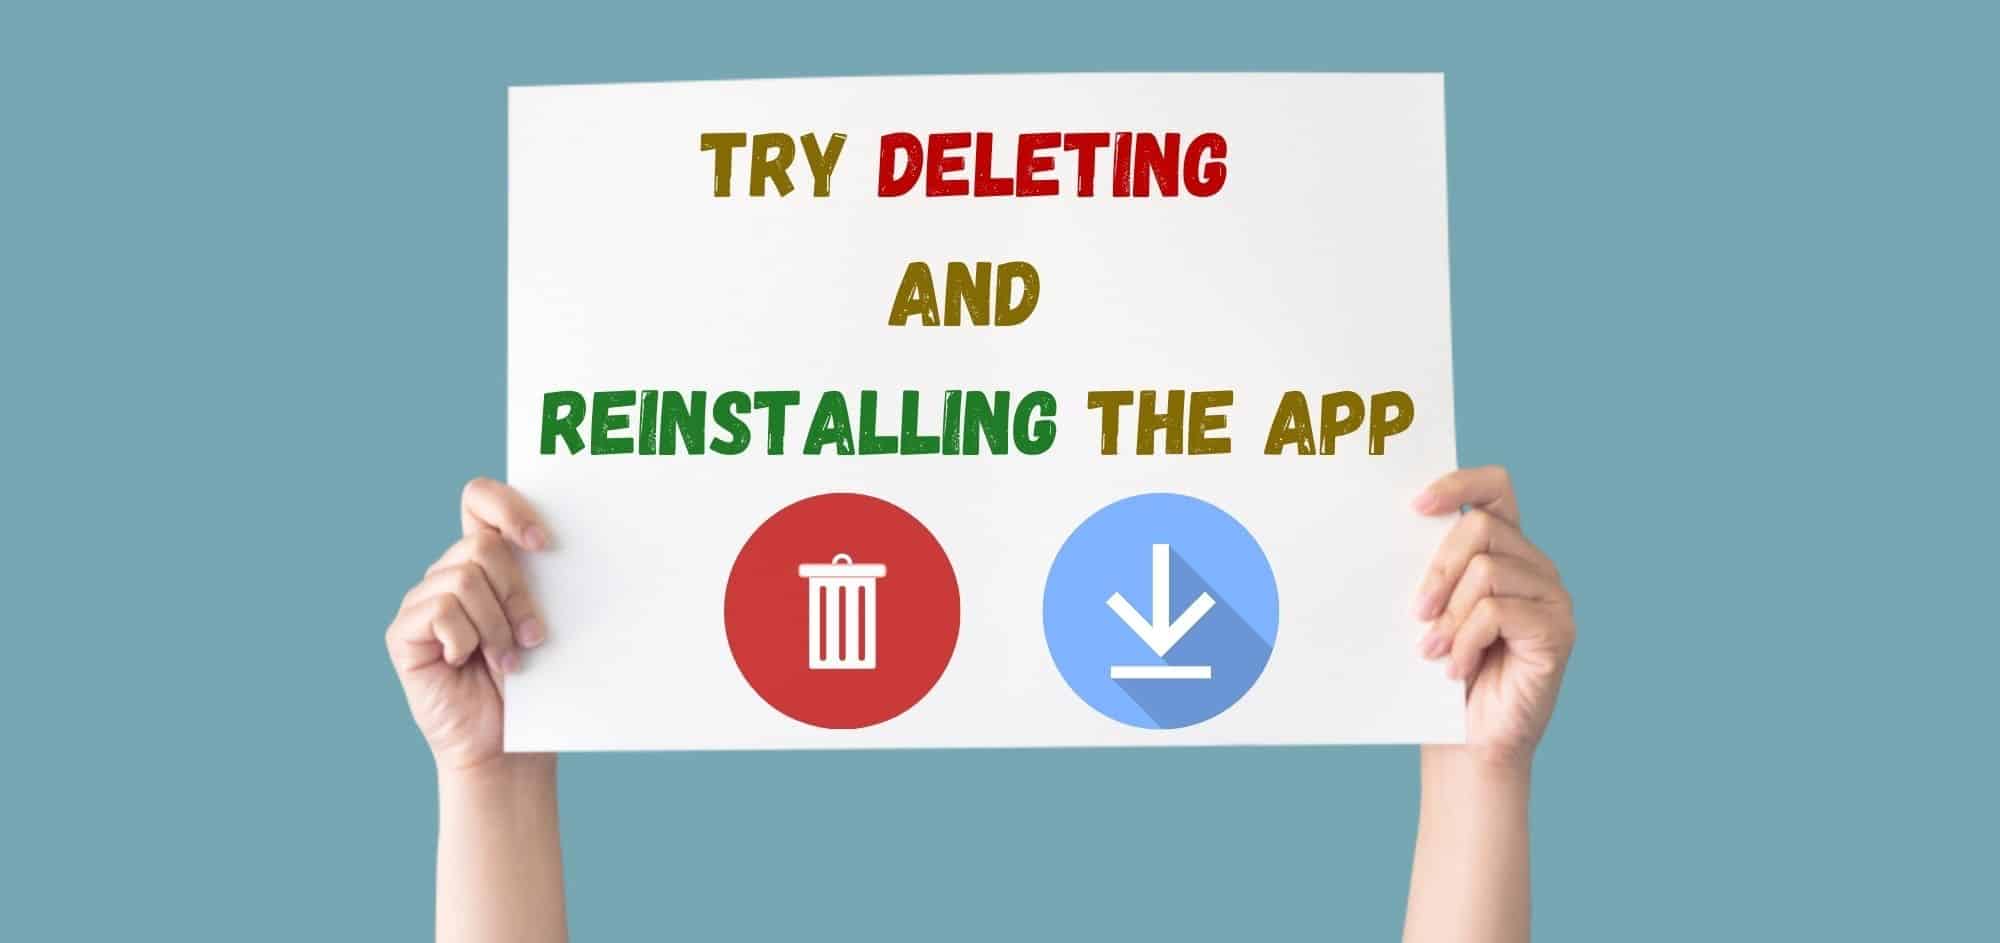 Try deleting and reinstalling the app